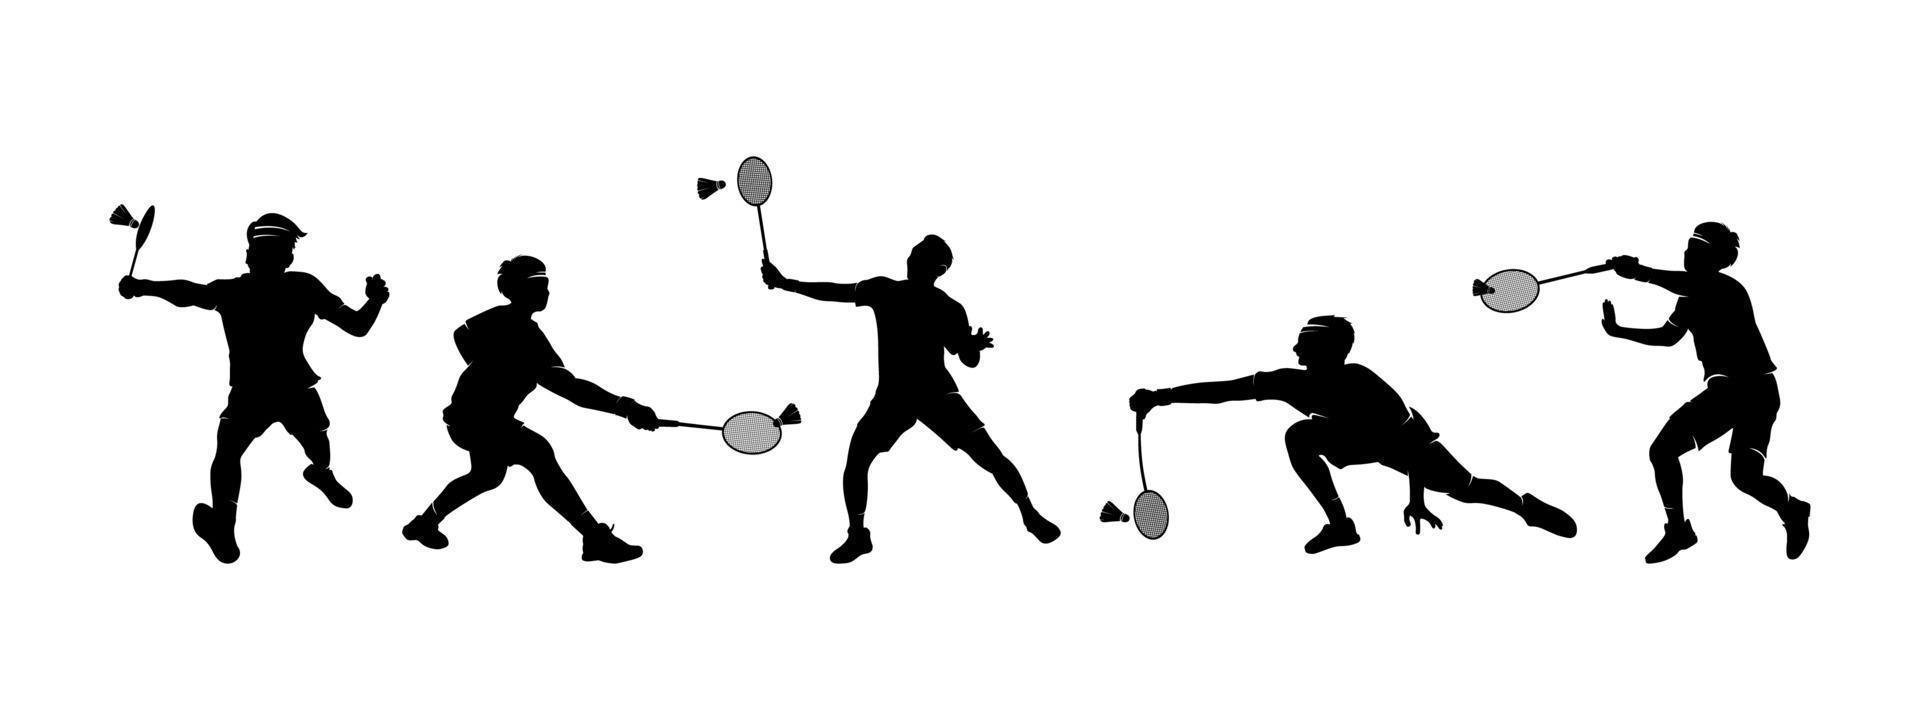 Collection silhouette of people playing badminton vector